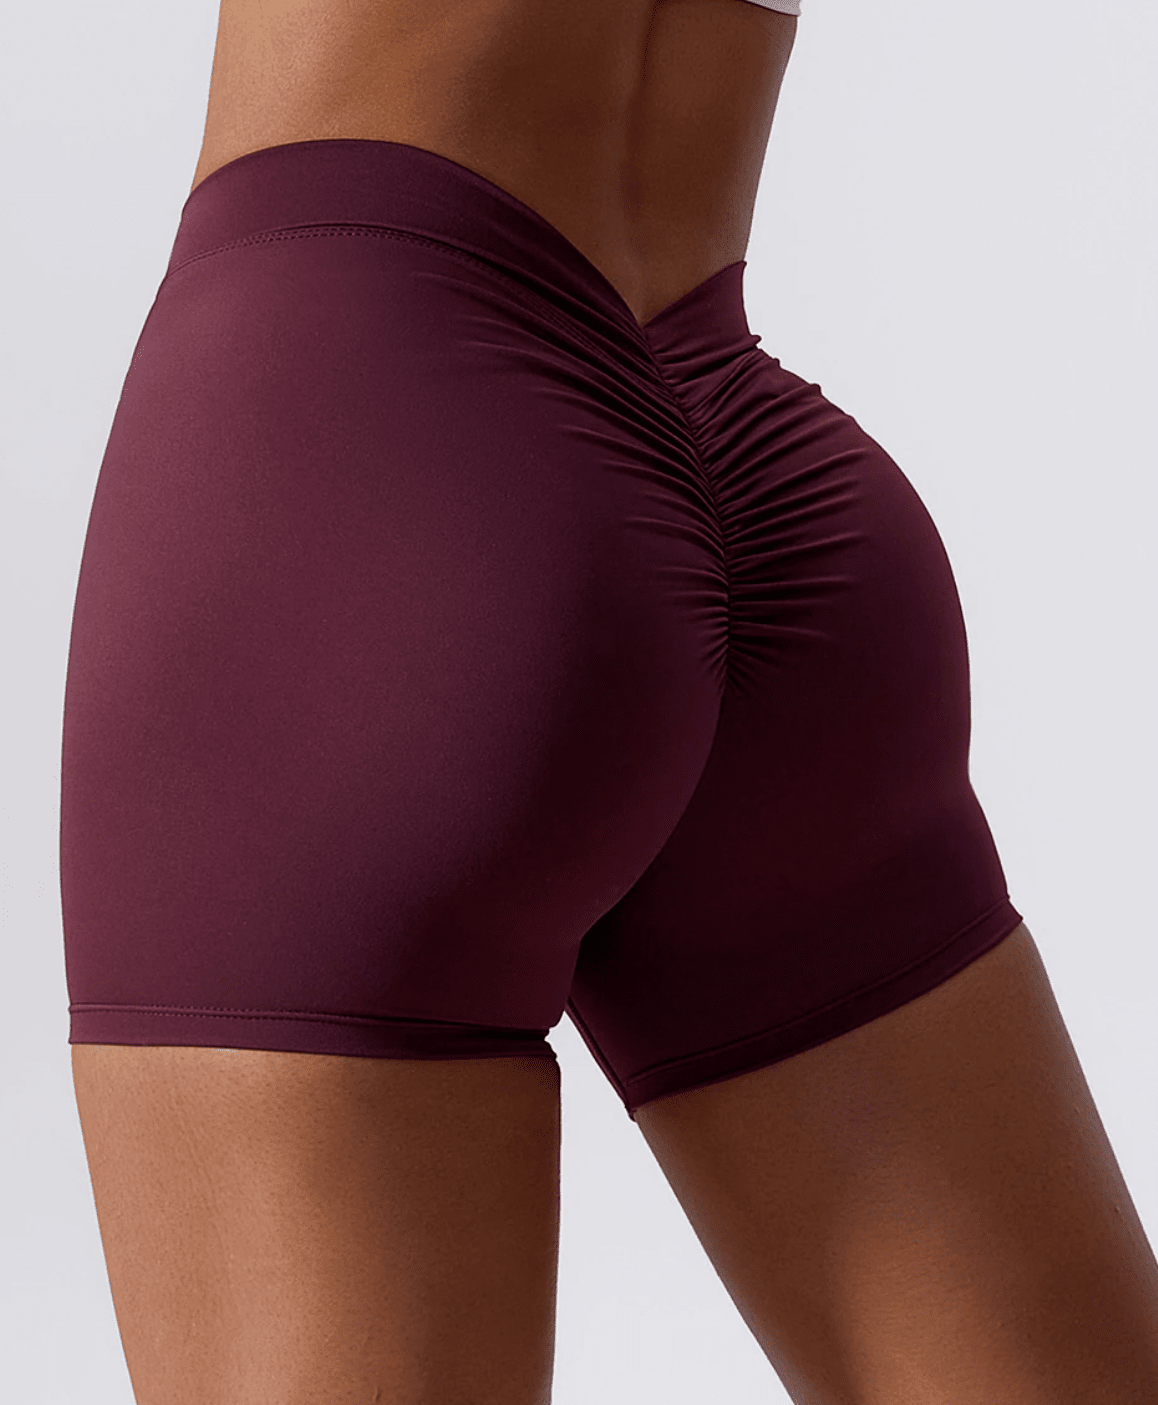 PowerStretch Squat-Proof Shorts Shorts Starlethics Deep Wine Red S 